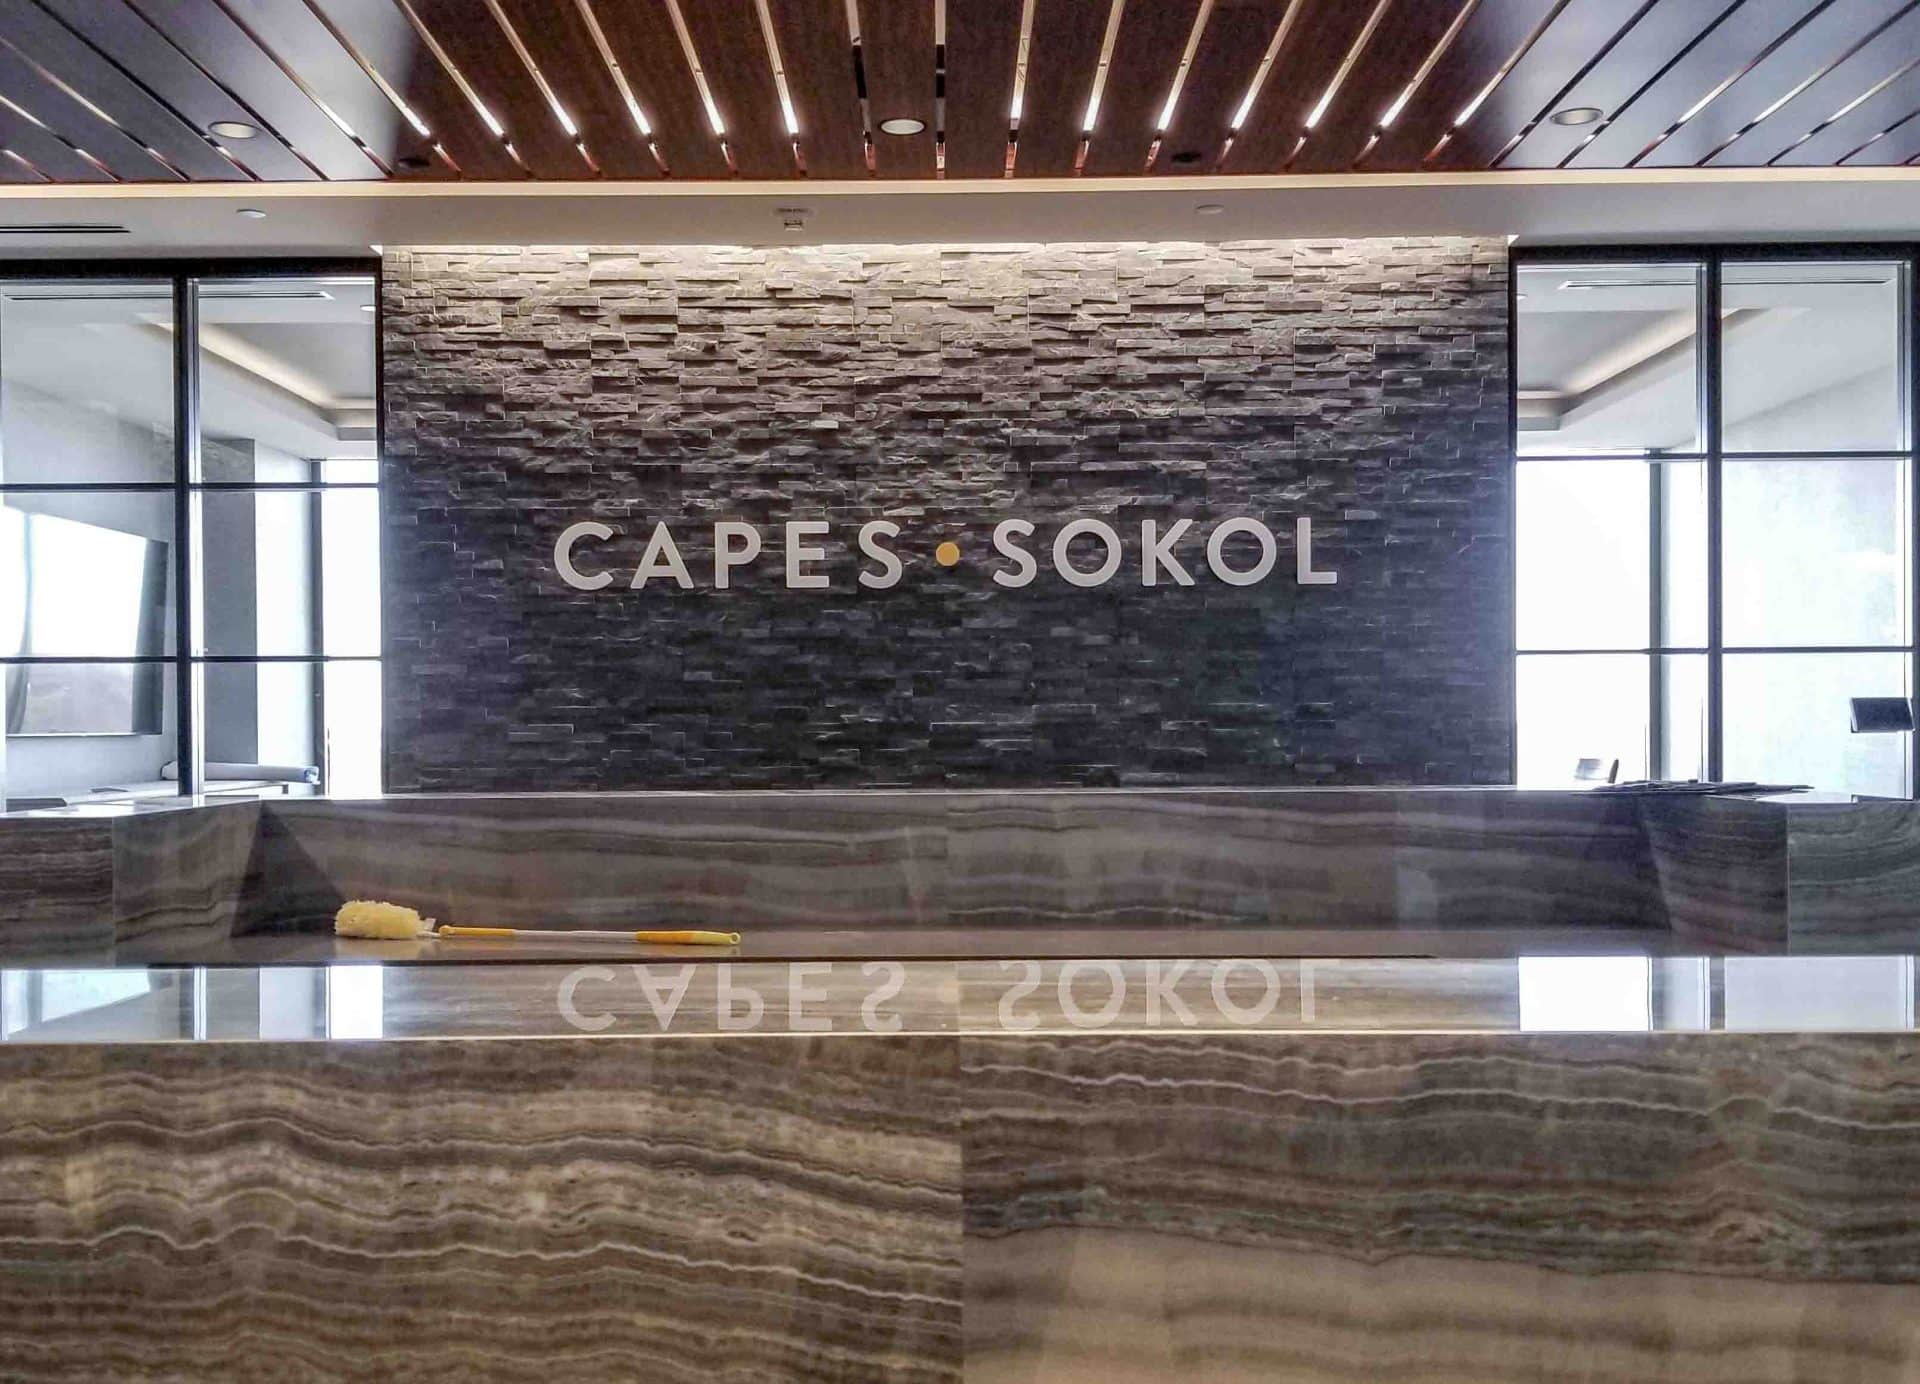 Capes Sokol dimensional letterset for custom logo wall installed on rock wall